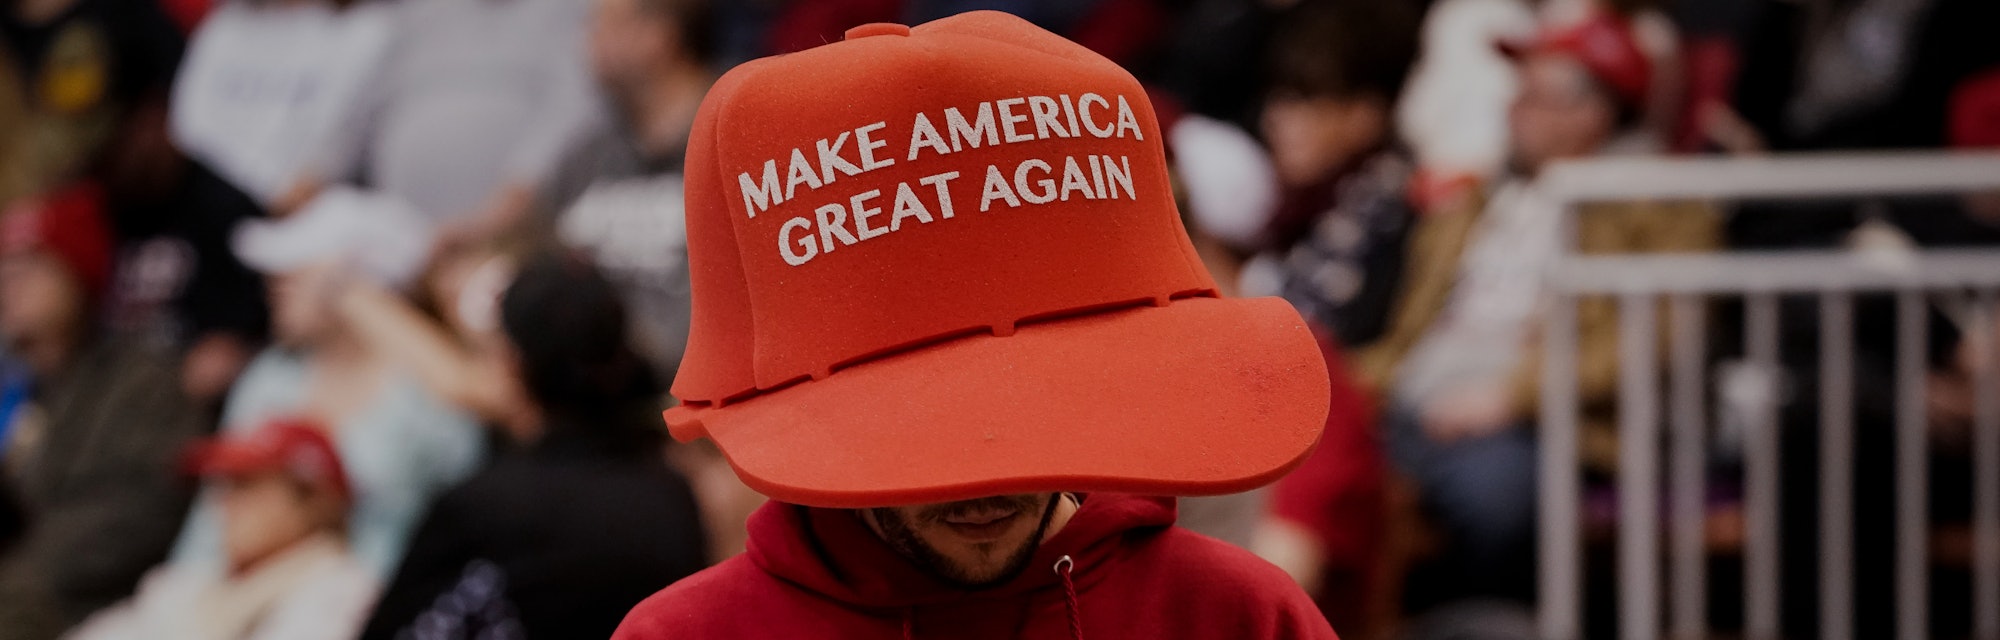 A Trump supporter can be seen wearing a large sized hat with "Make America Great Again" on it. His s...